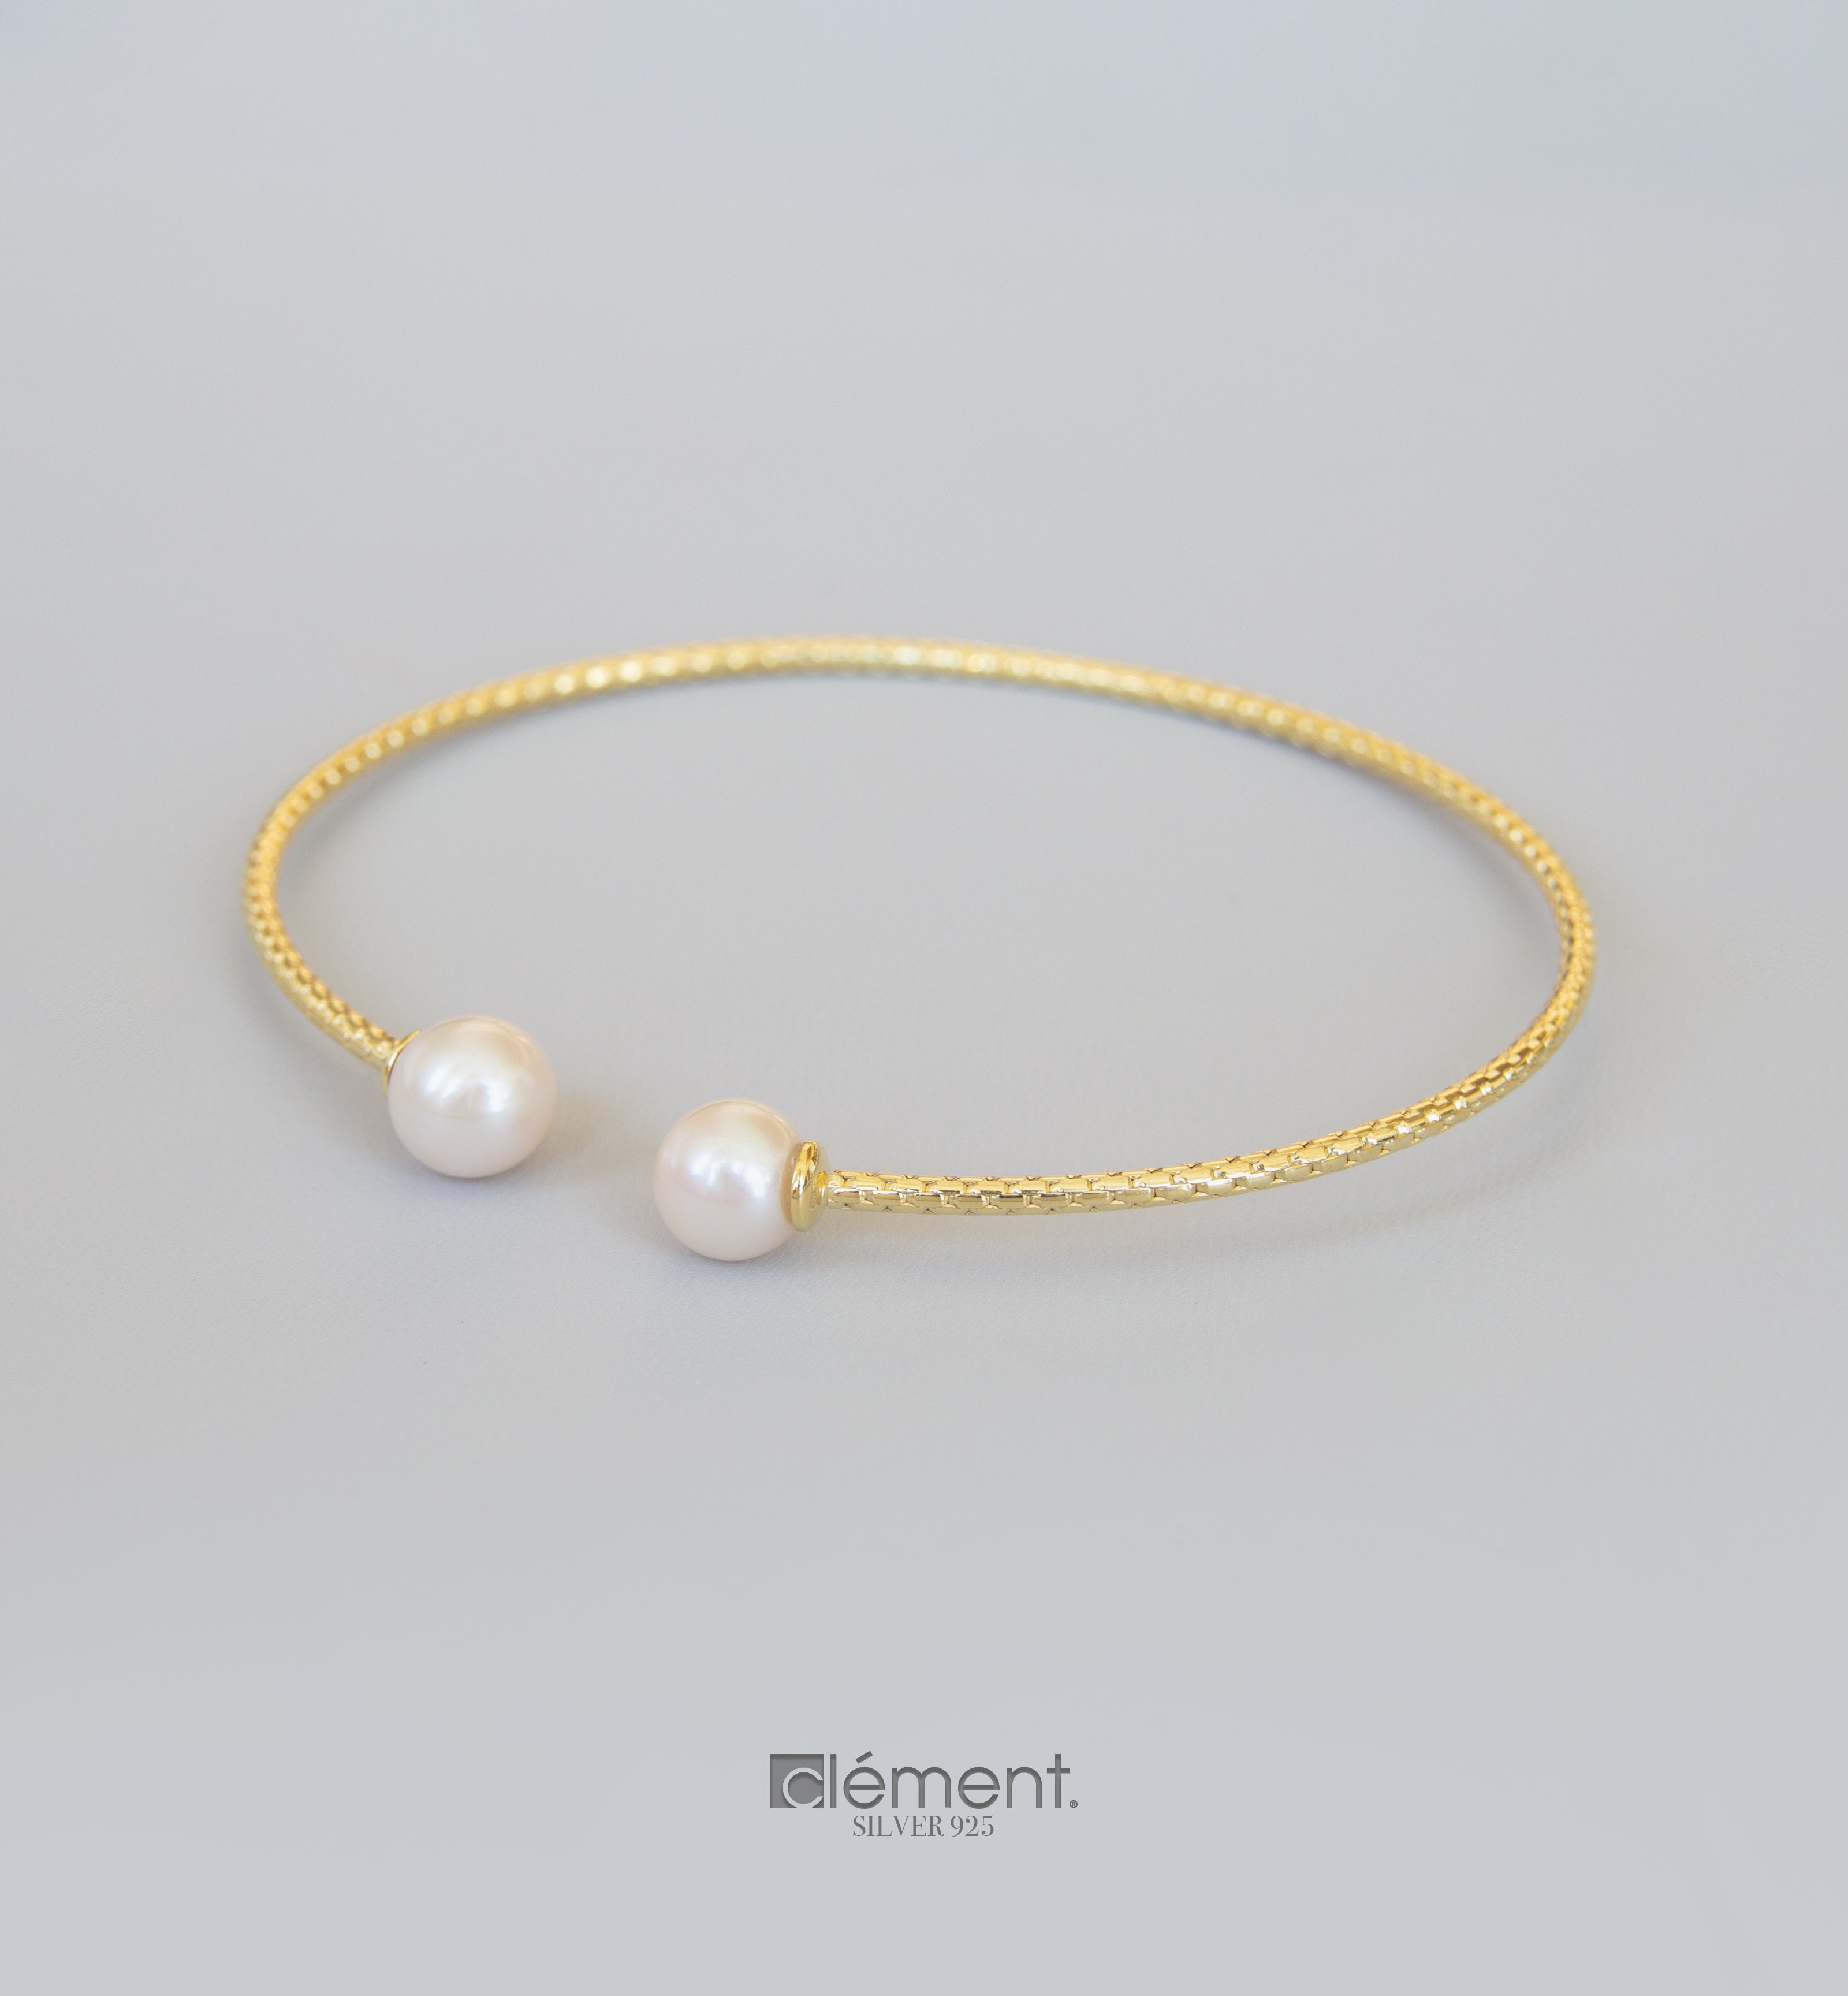 Silver 925 Yellow Gold Plated Bangle with Two Pearls